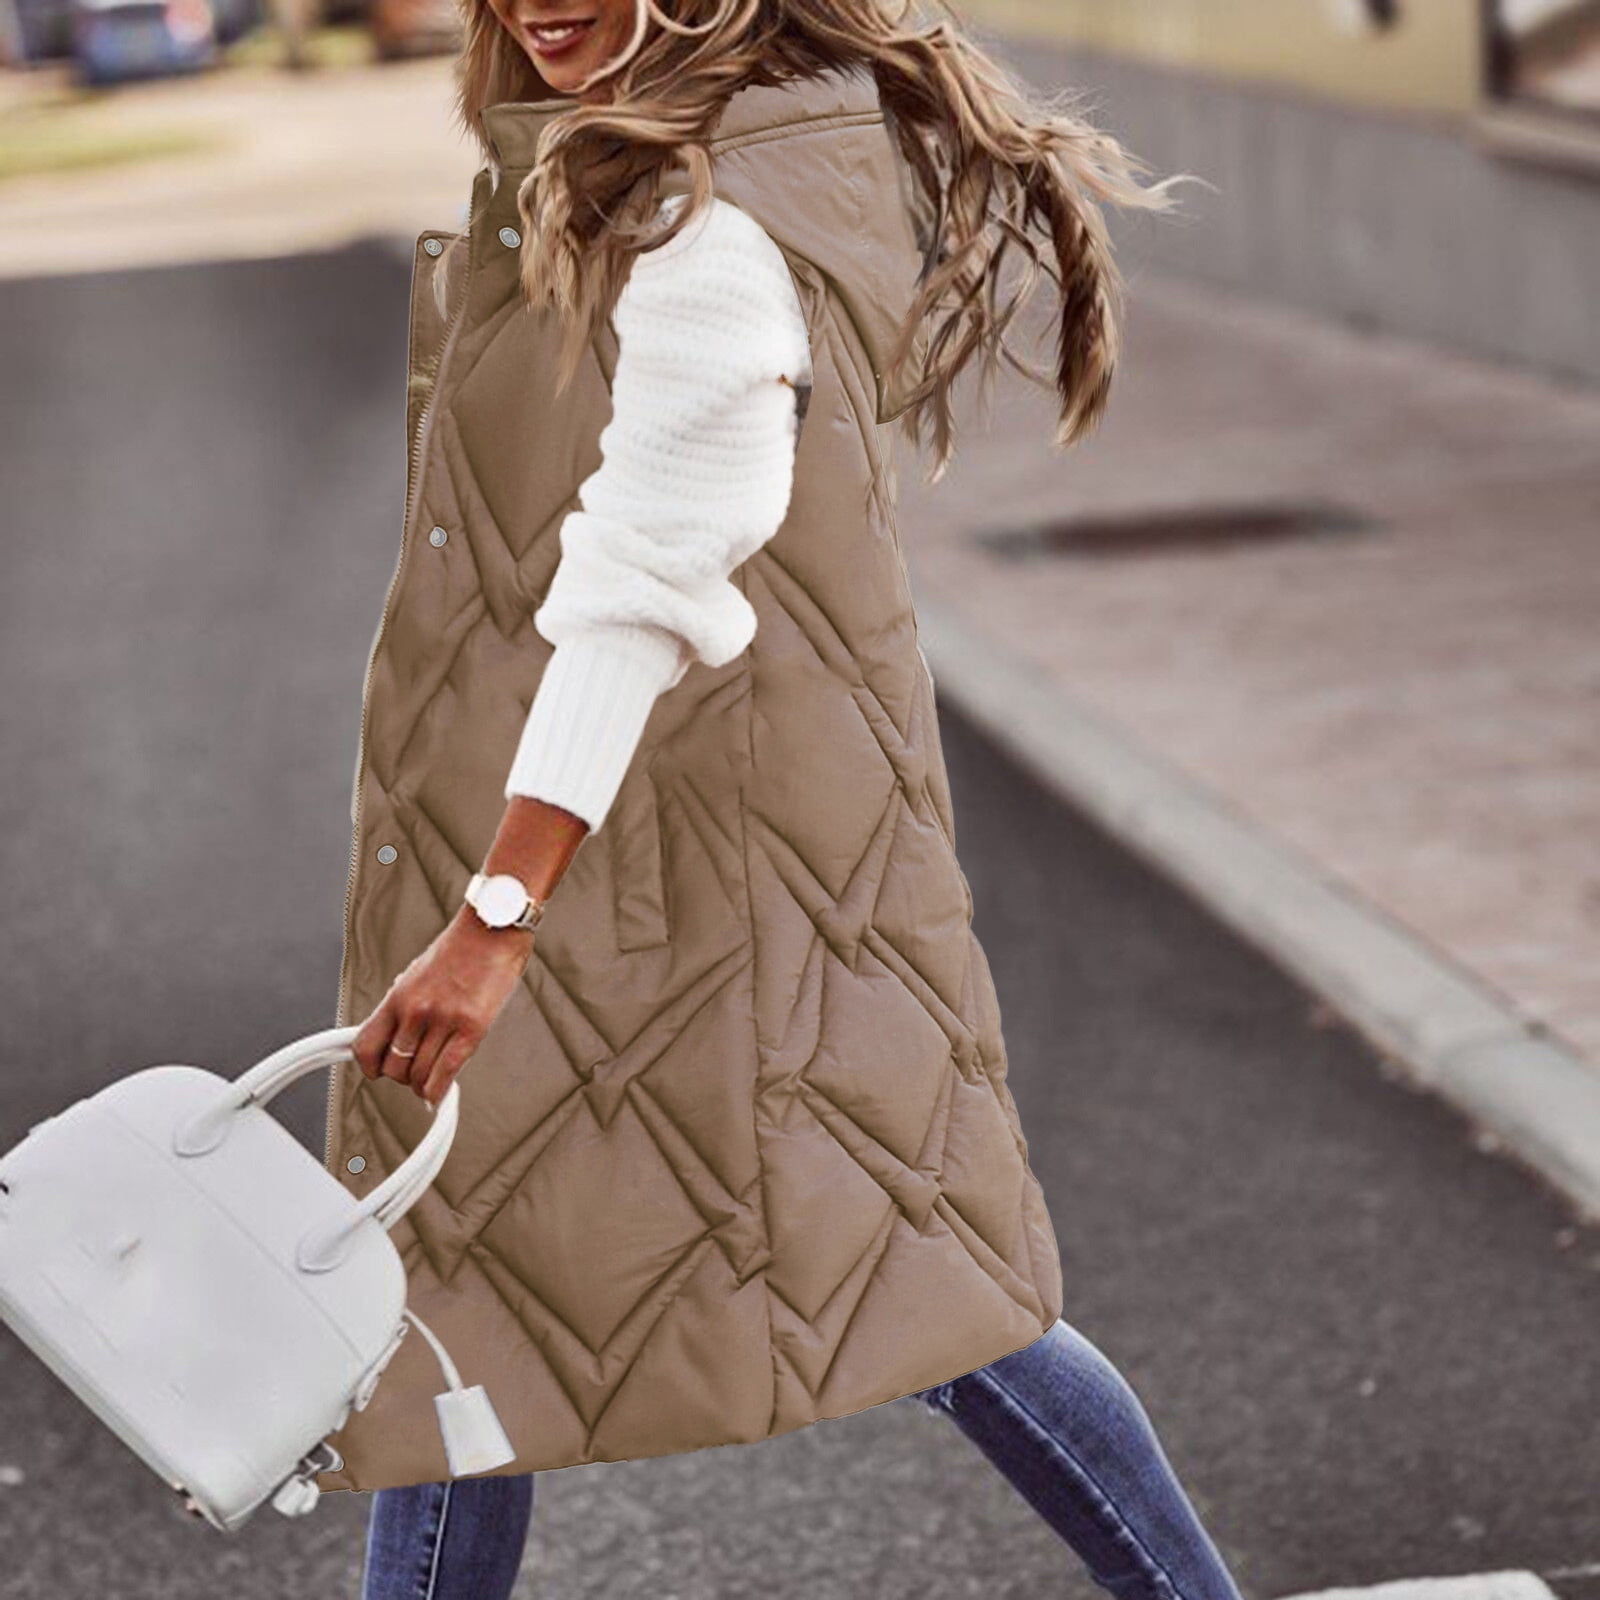 Women's Long Winter Coat Vest With Hood Sleeveless Warm Down Coat With Pockets Quilted Vest Down Jacket Quilted Outdoor Jacket Walmart.com